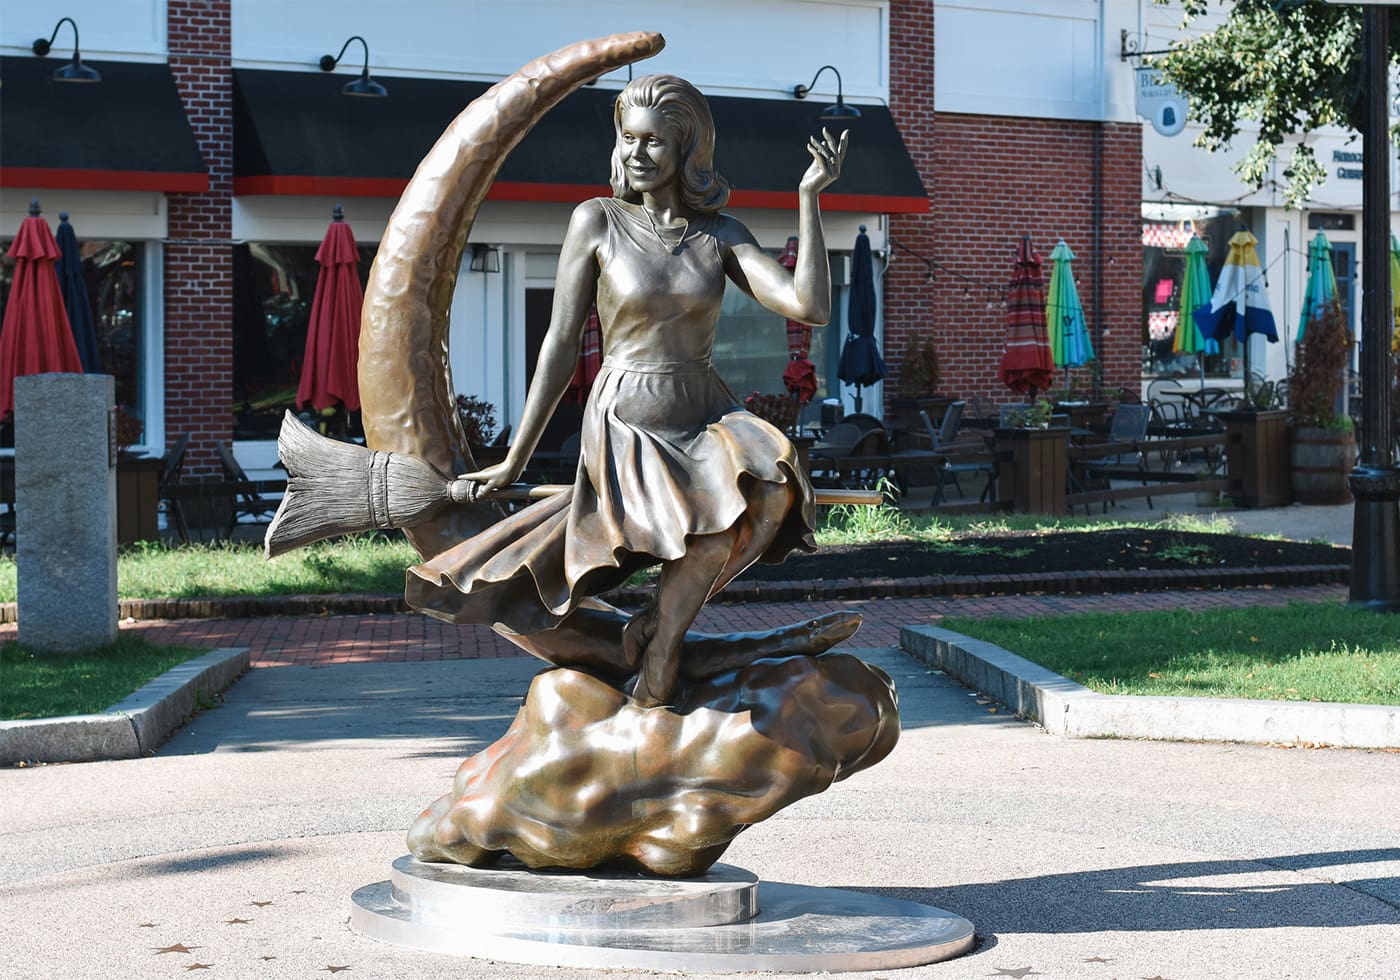 The Bewitched Statue, situated in the city center of Salem